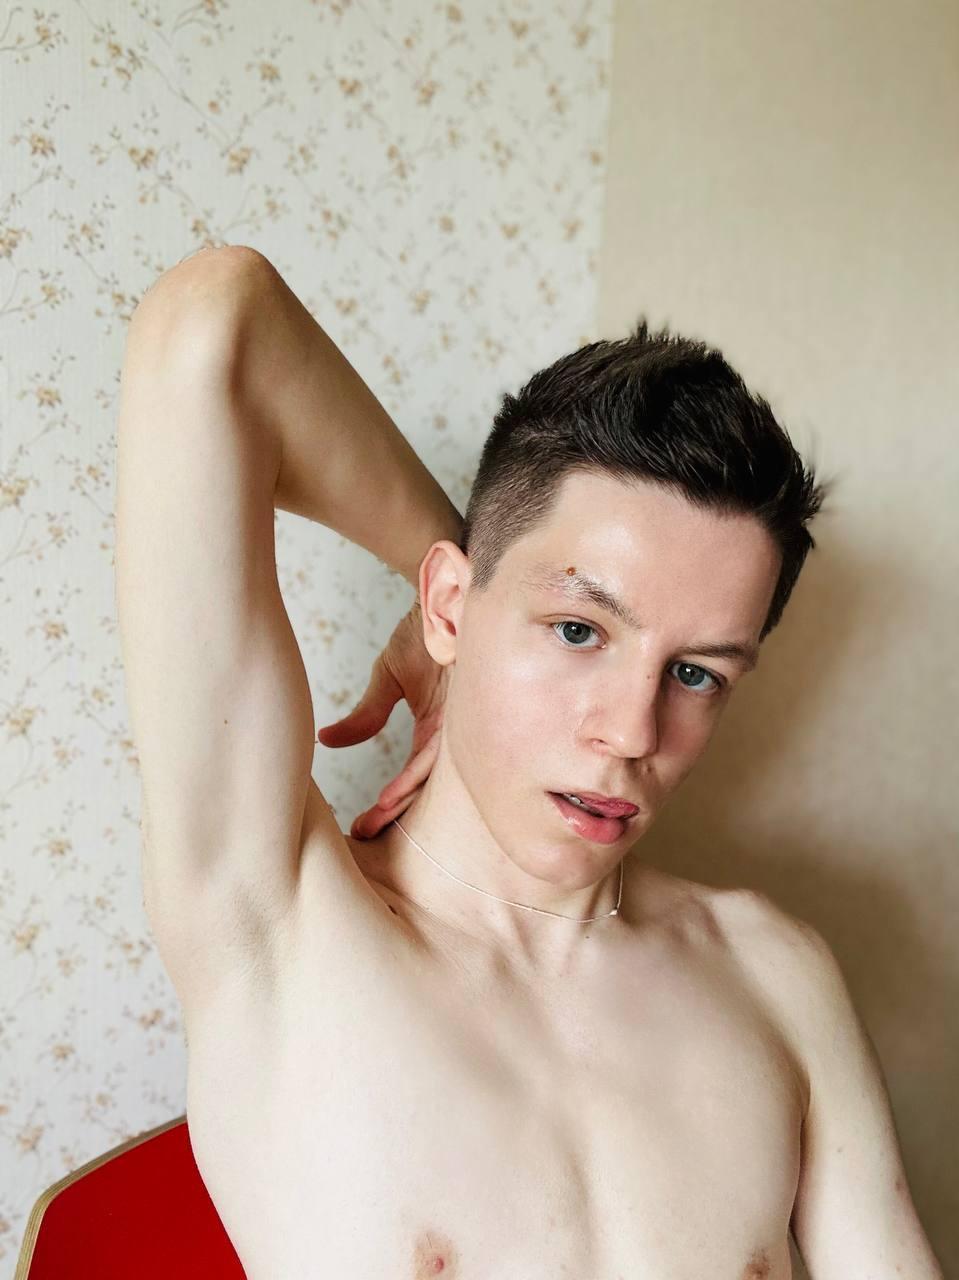 cam chat free Evgeny Twink